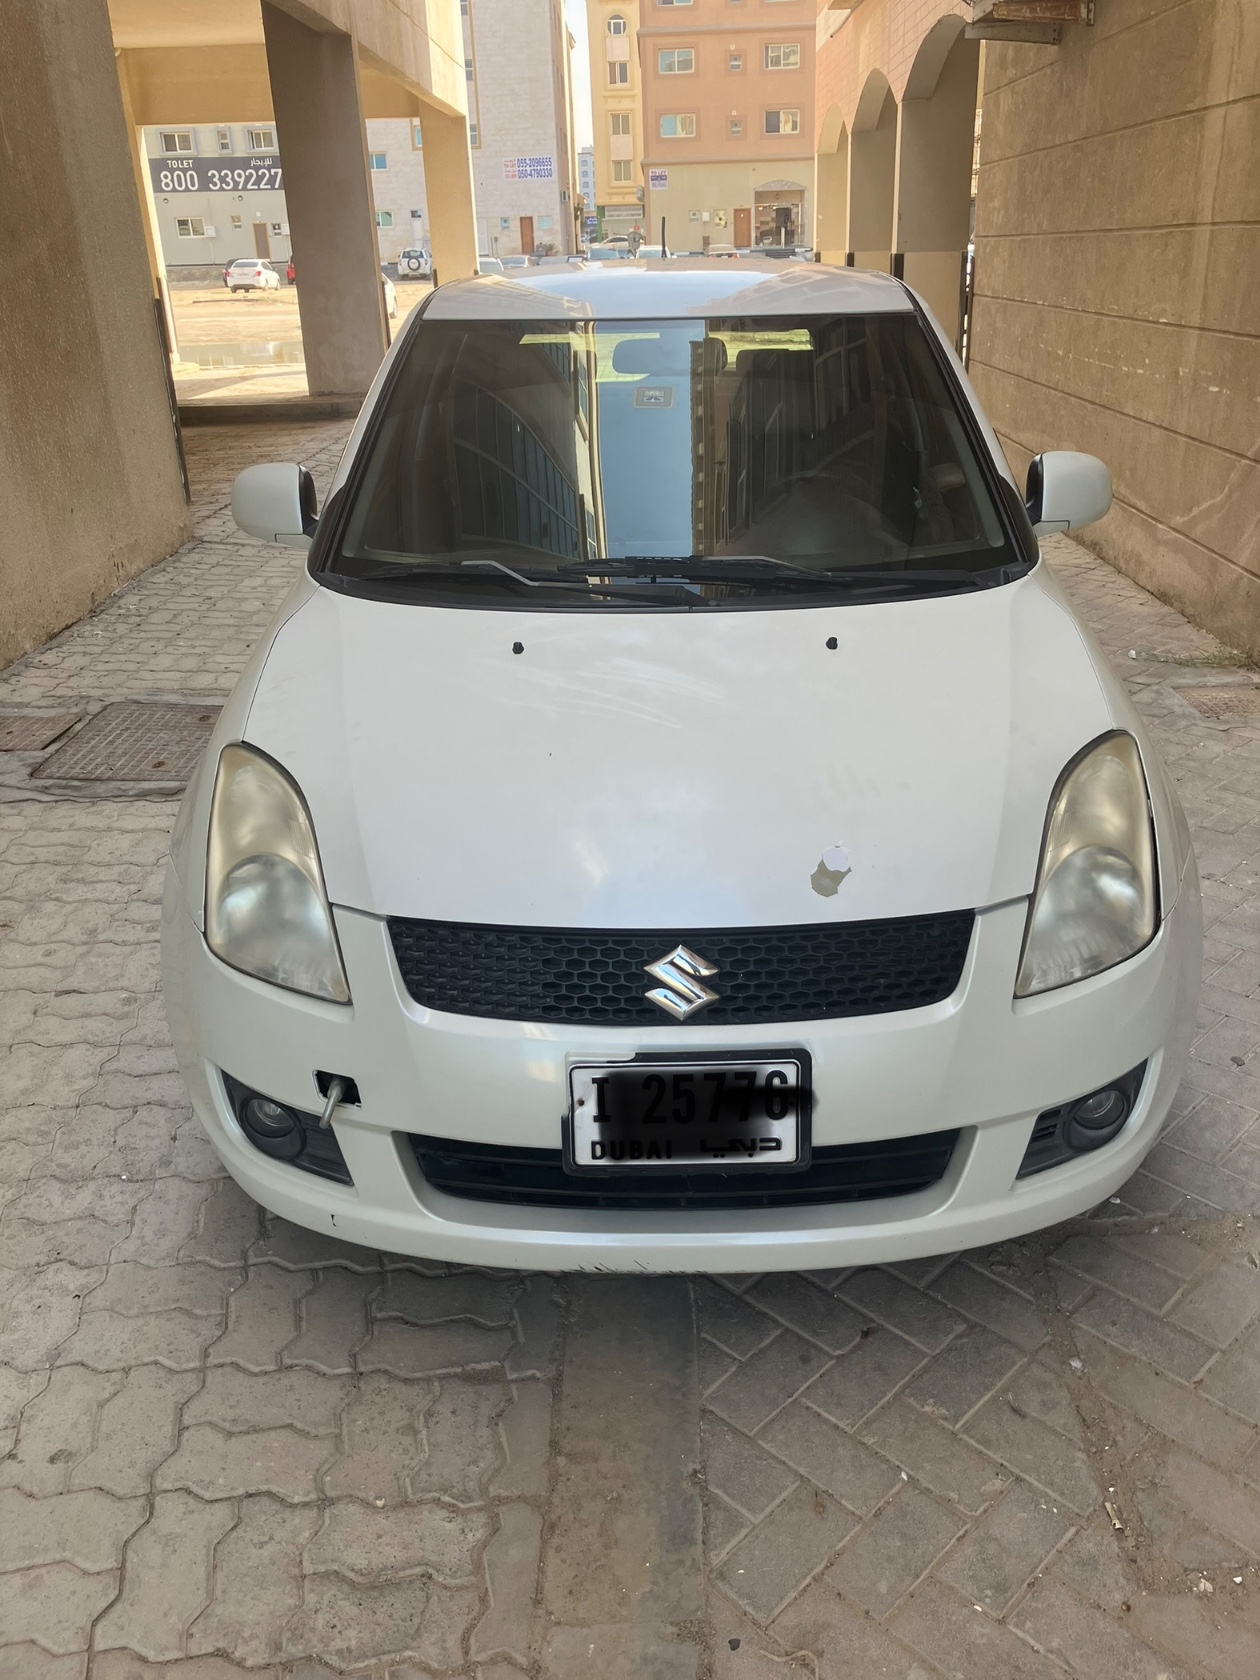 The Advantages of Buying Used 2009 Suzuki Swift in the UAE